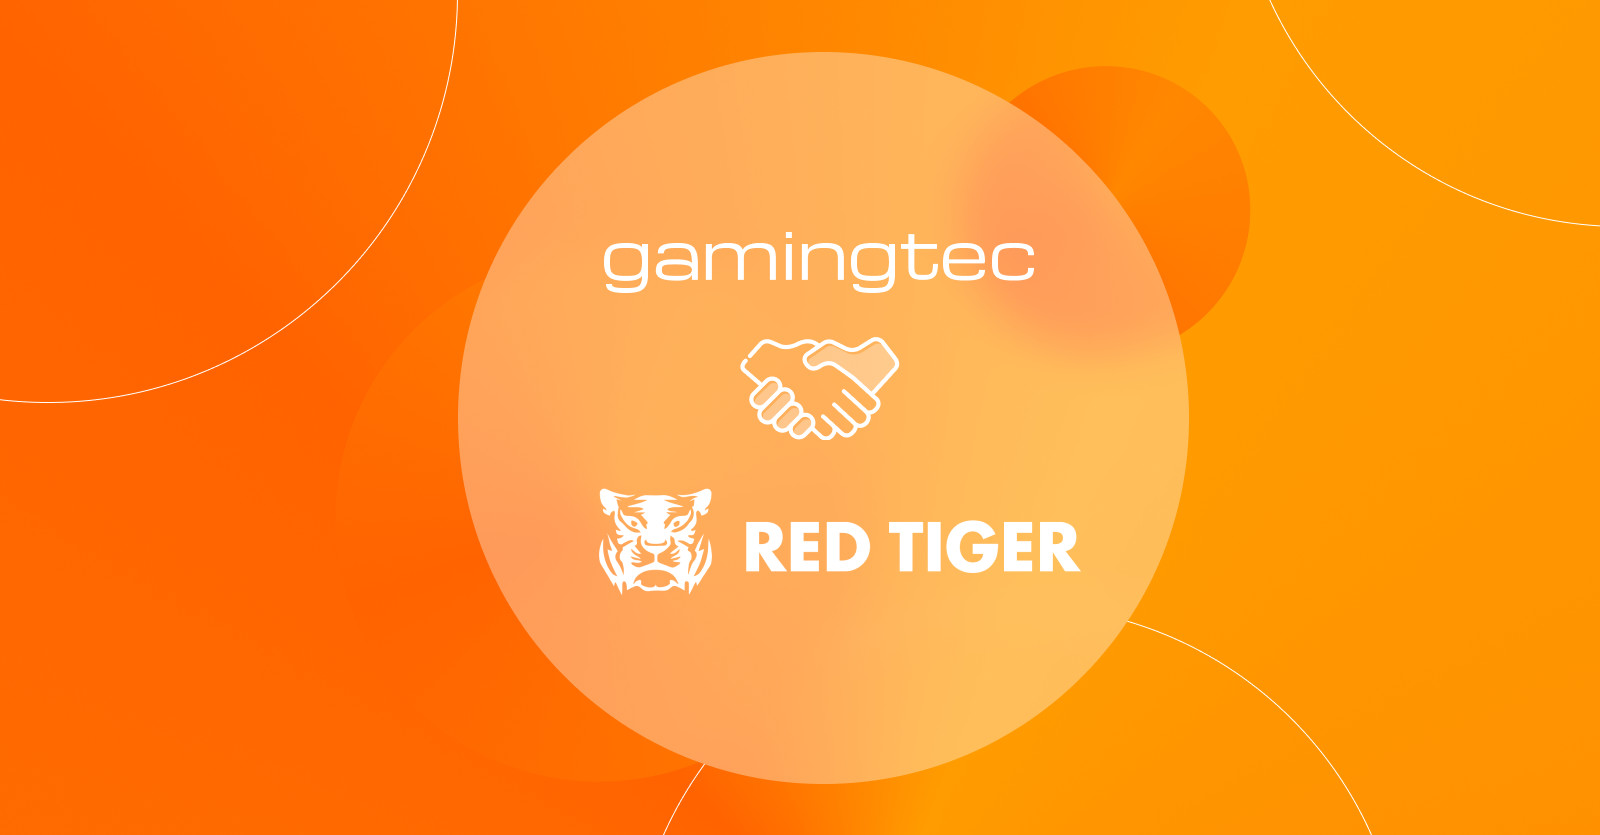 Gamingtec forms new content deal with Red Tiger